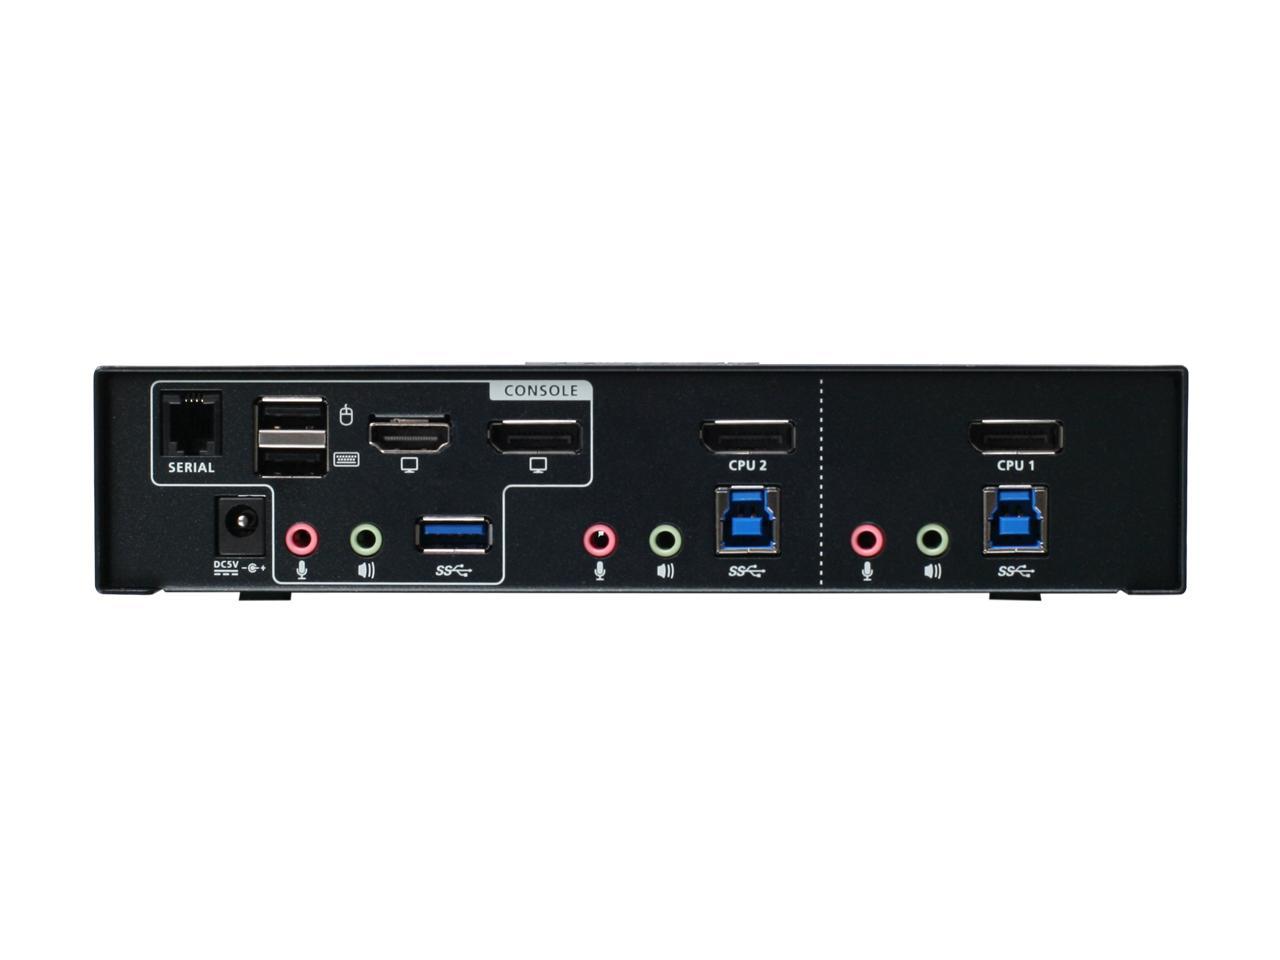 IOGEAR GCS1932M 2-Port 4K DisplayPort KVMP Switch with Dual Video Out and RS-232